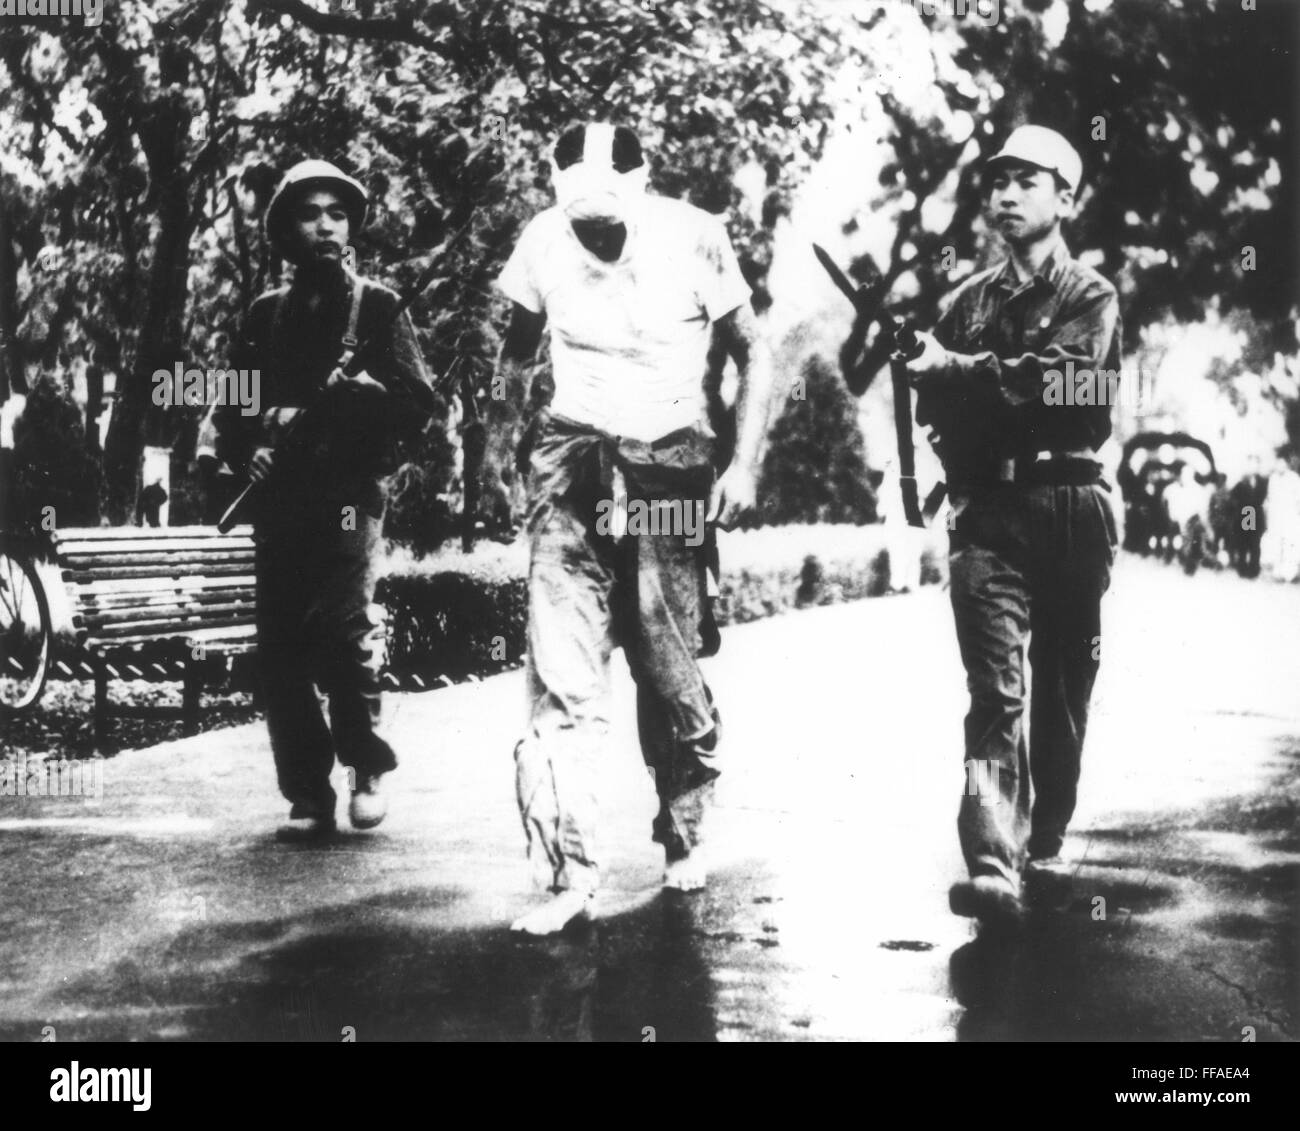 VIETNAM WAR. /nParading of U.S. prisoner, with bandaged face, walking barefoot between two Vietcong guards. Stock Photo